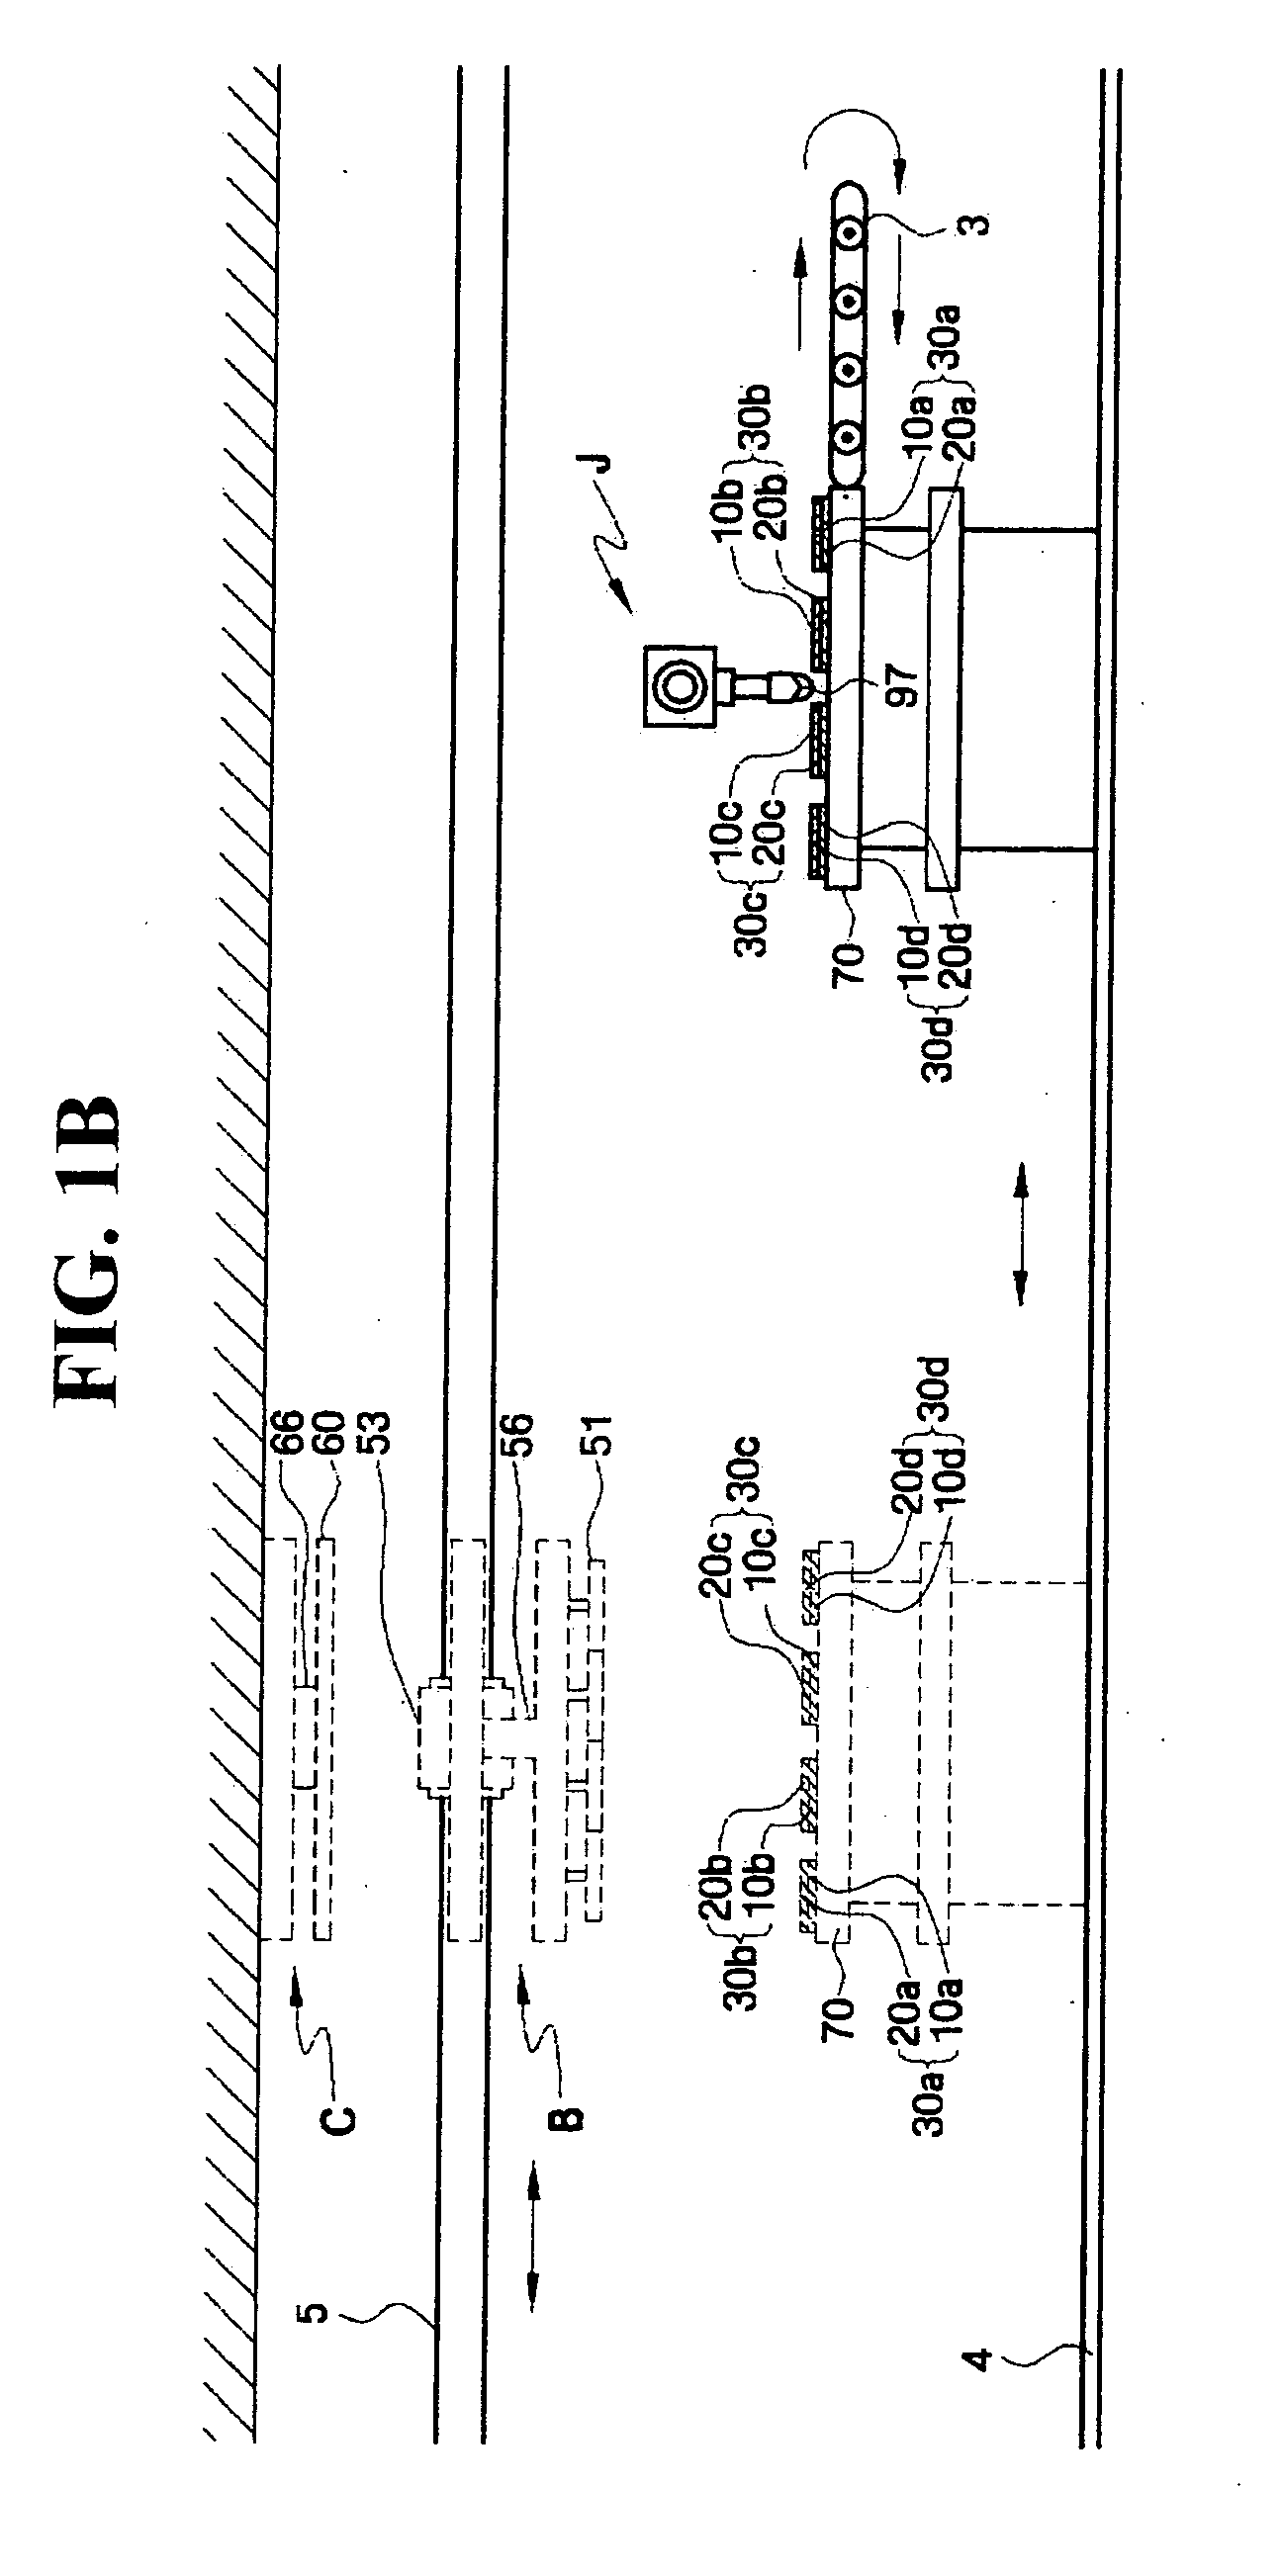 System and method for cutting liquid crystal display substrate